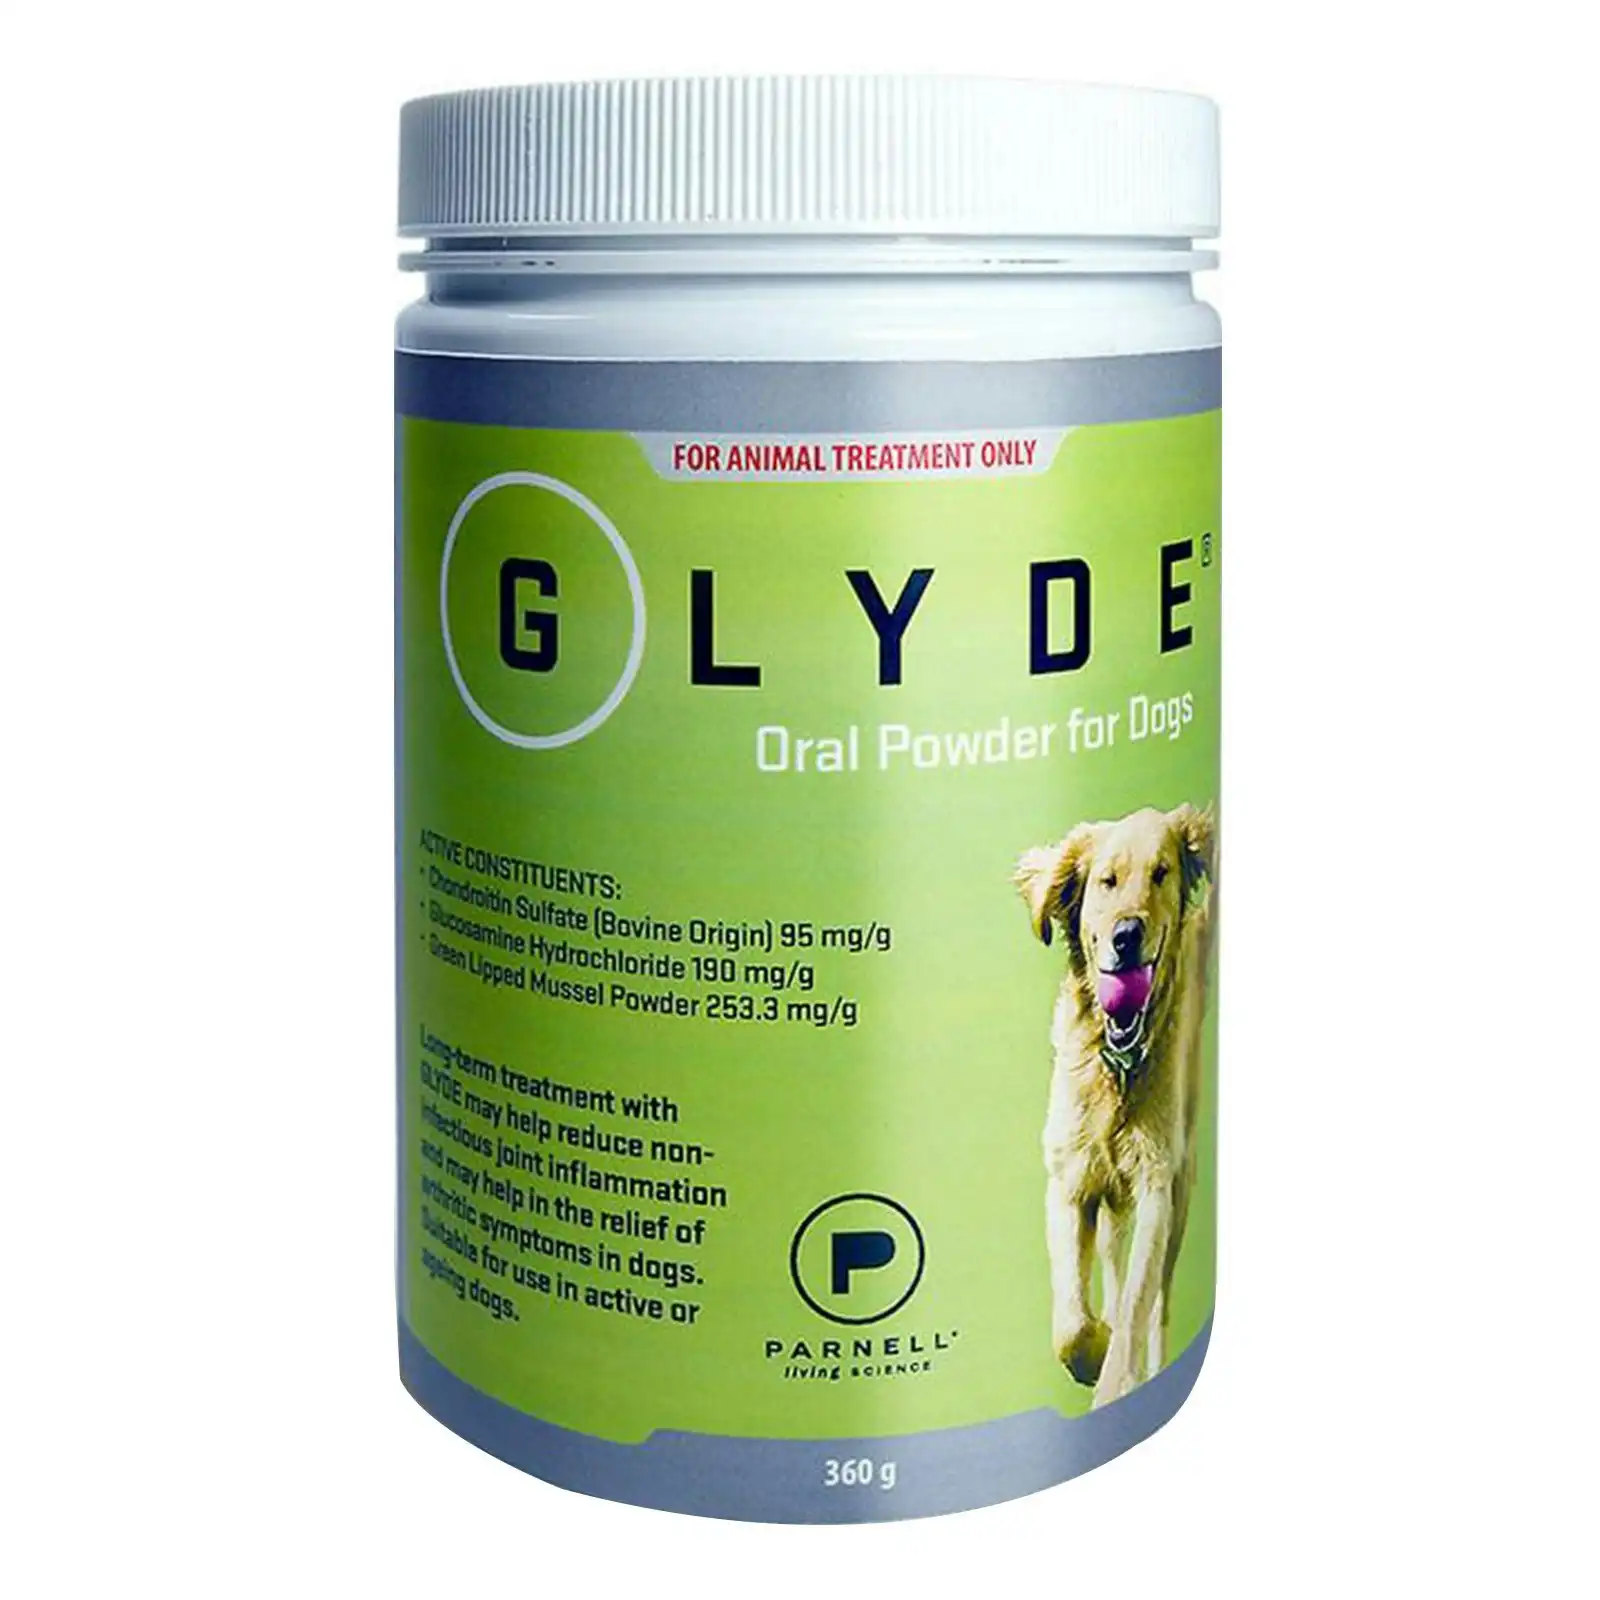 Glyde Oral Powder For Dogs 360 Gm